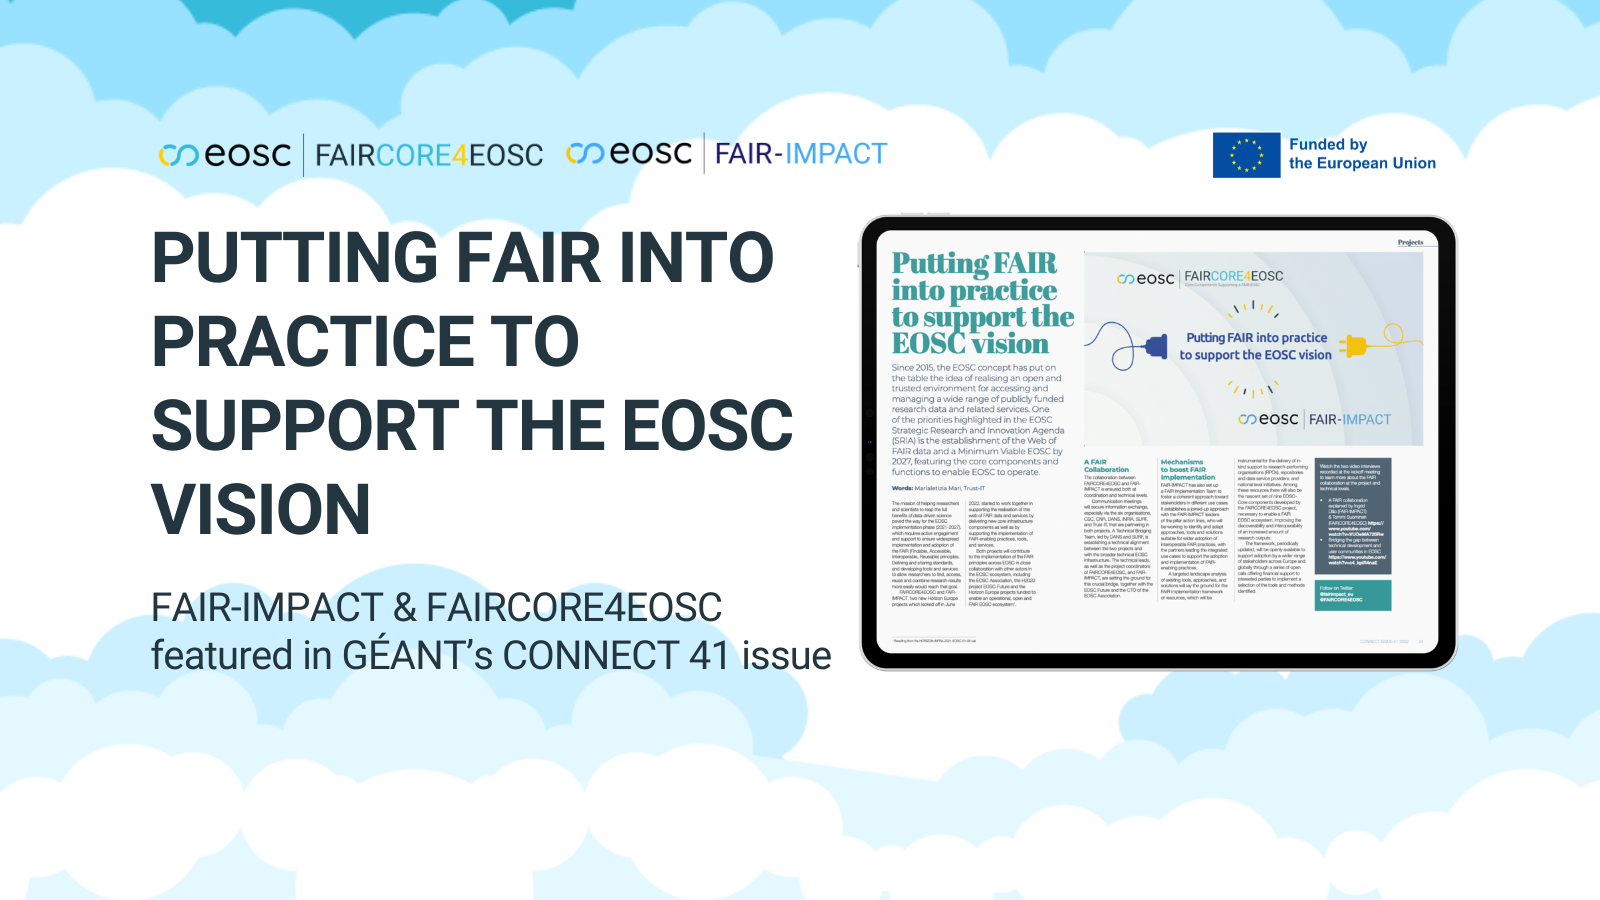 Putting FAIR into practice to support the EOSC vision: FAIR-IMPACT & FAIRCORE4EOSC featured into GÉANT’s CONNECT 41 issue!